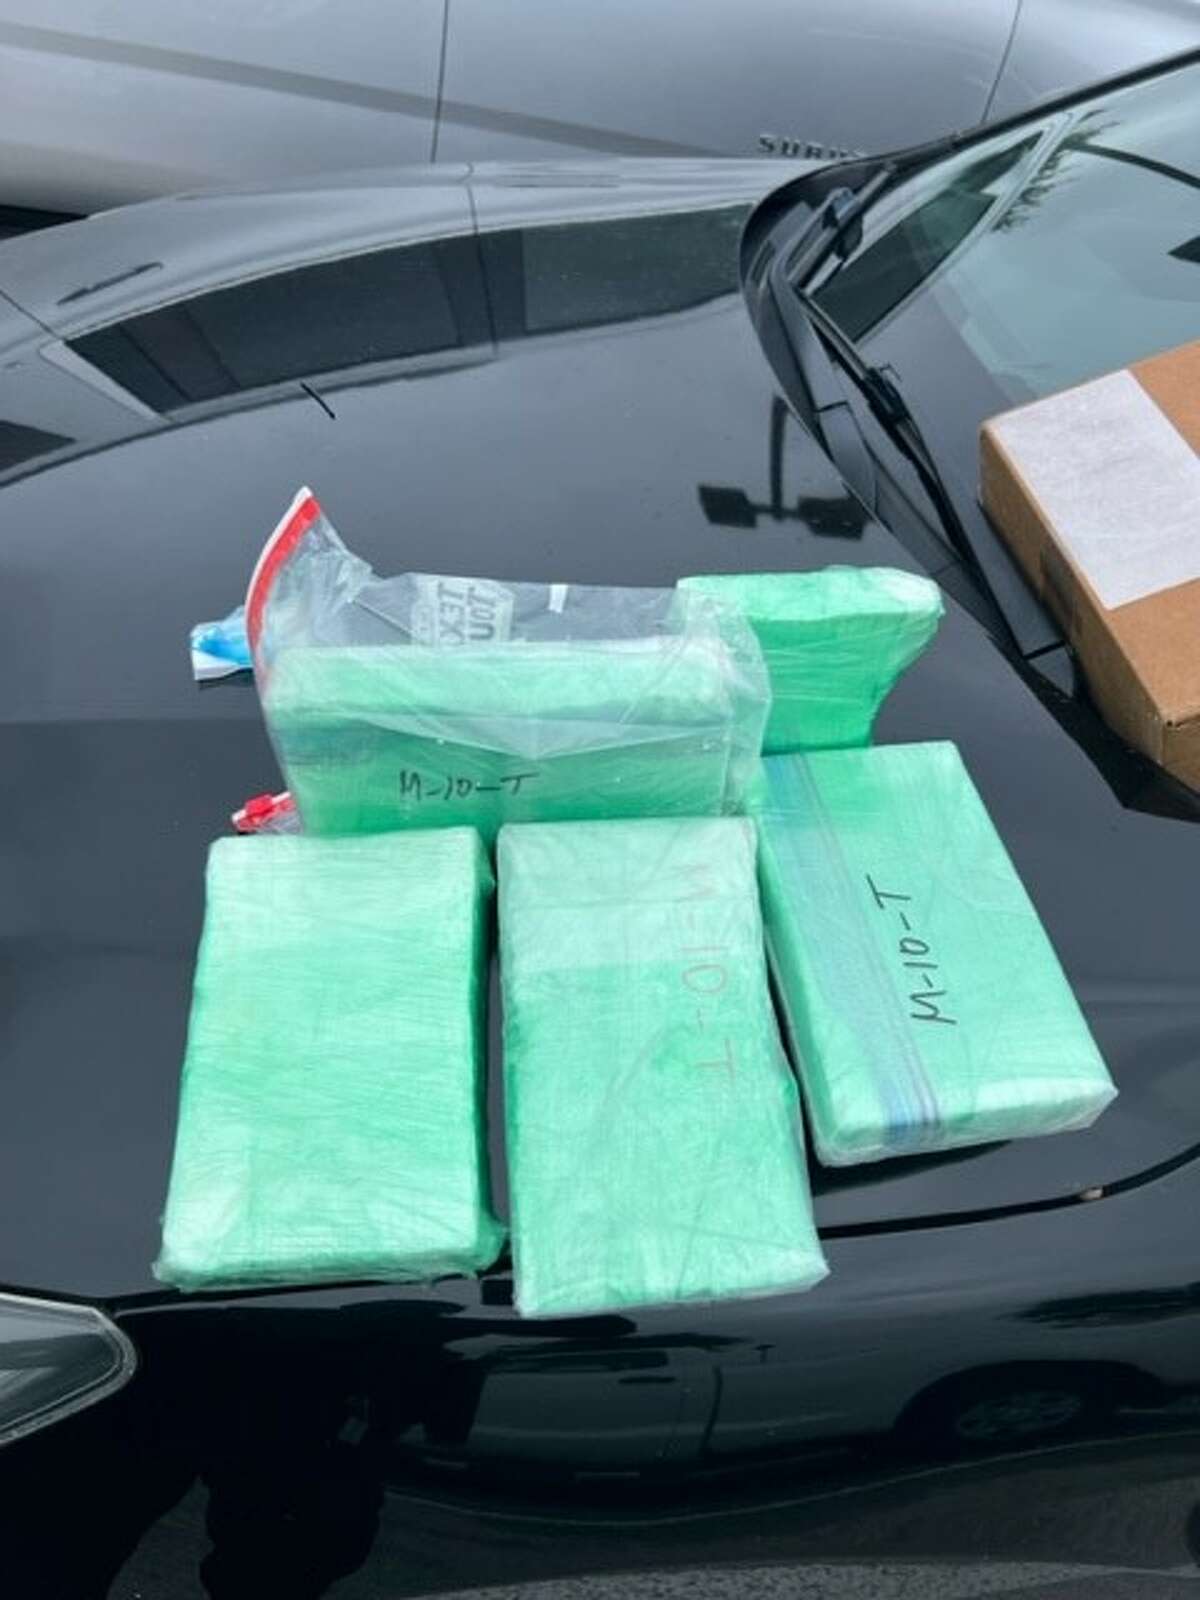 Bexar County Sheriff's Office deputies found $200,000 worth of cocaine during a traffic stop on the city's Northside.